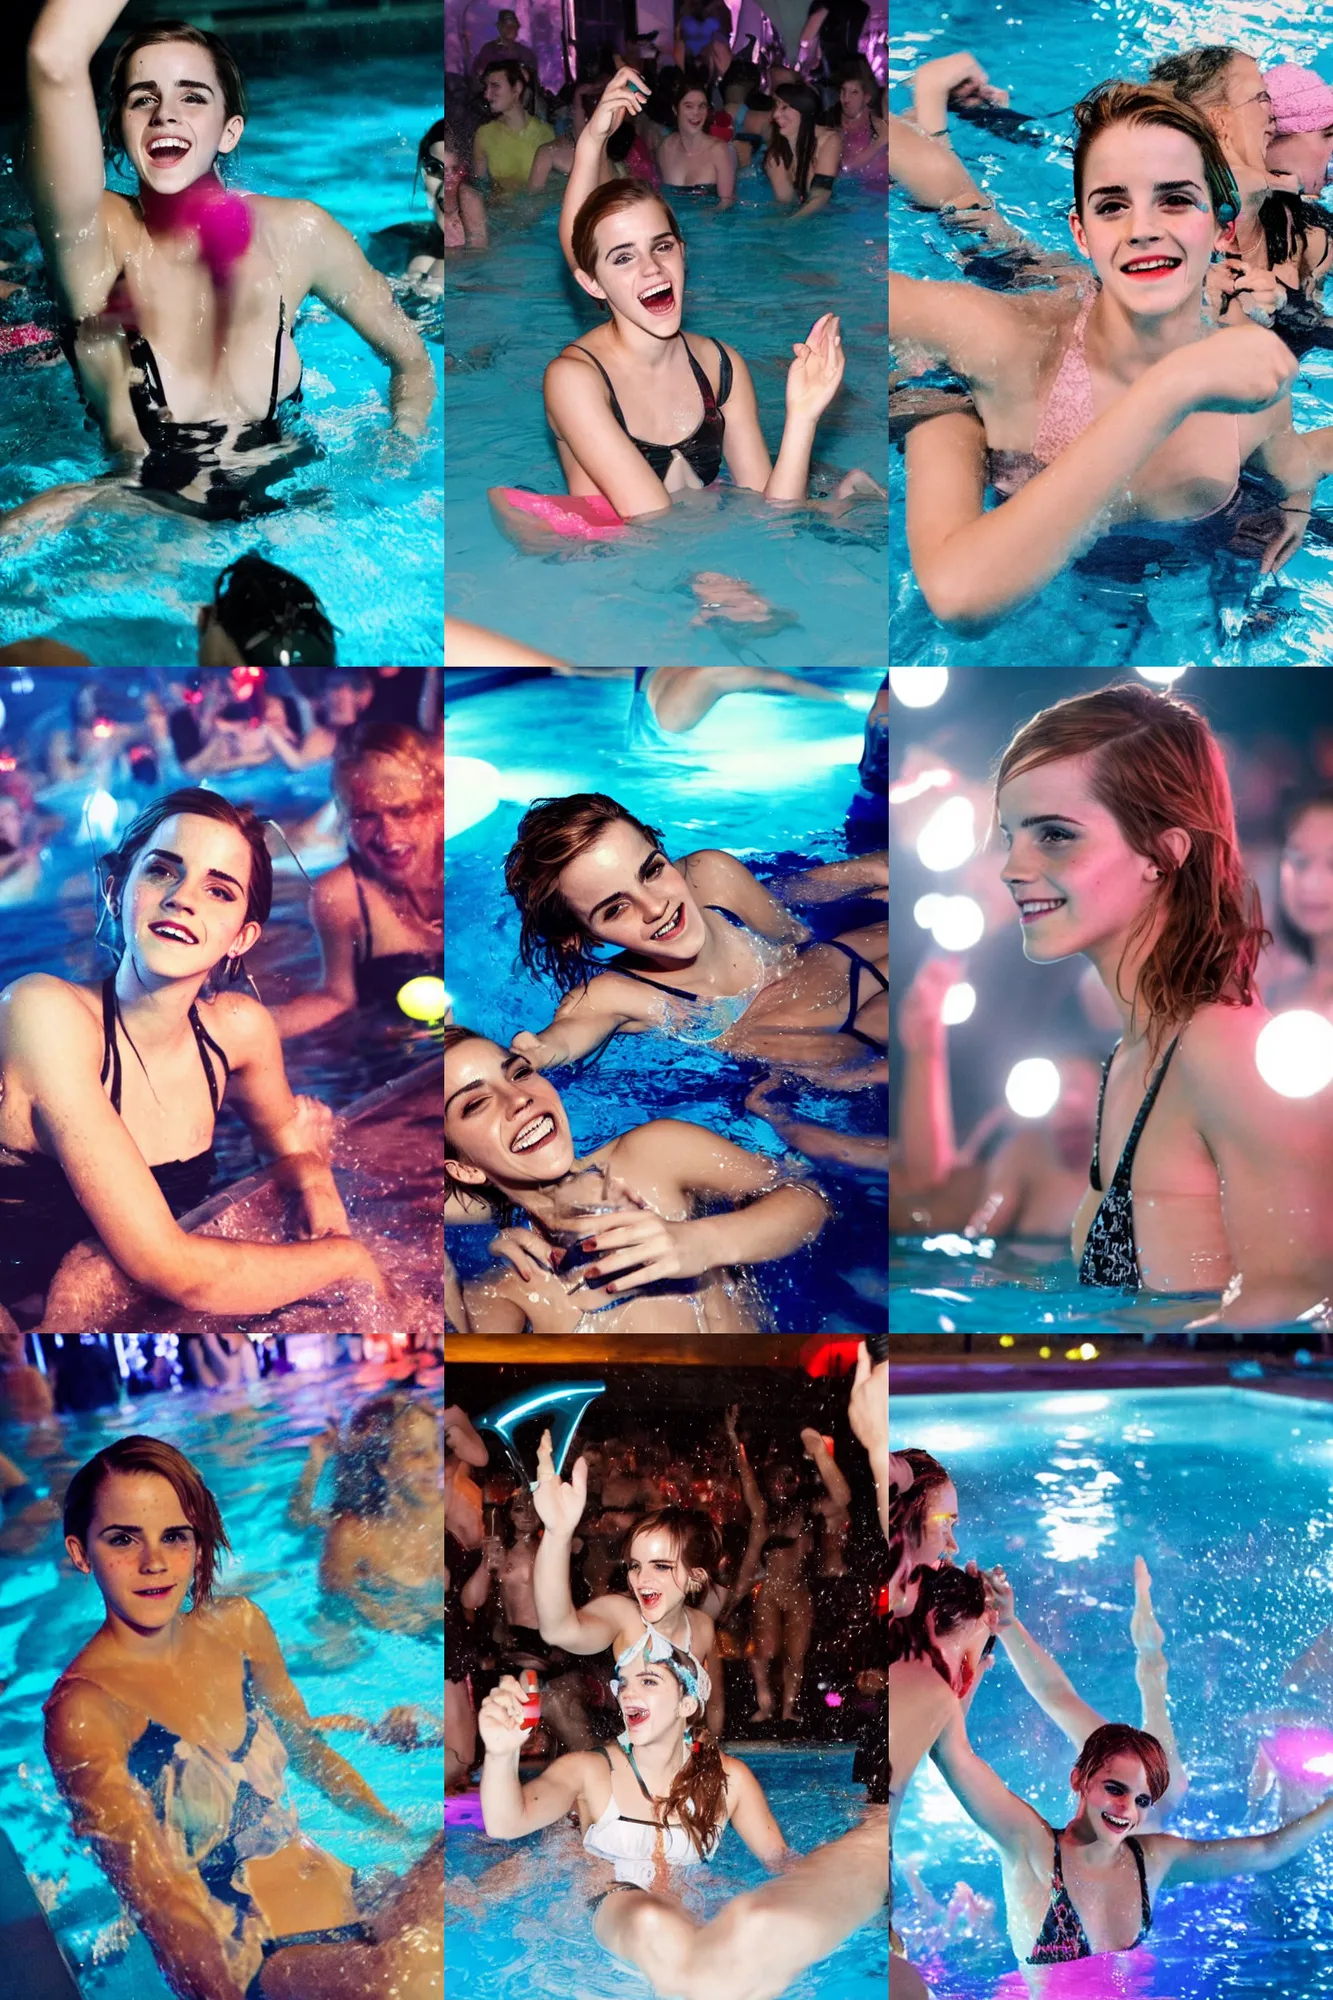 Prompt: a photo of a drunk emma watson having fun in a pool party filled with people in a modern indoors pool with cyberpunk illumination at night.